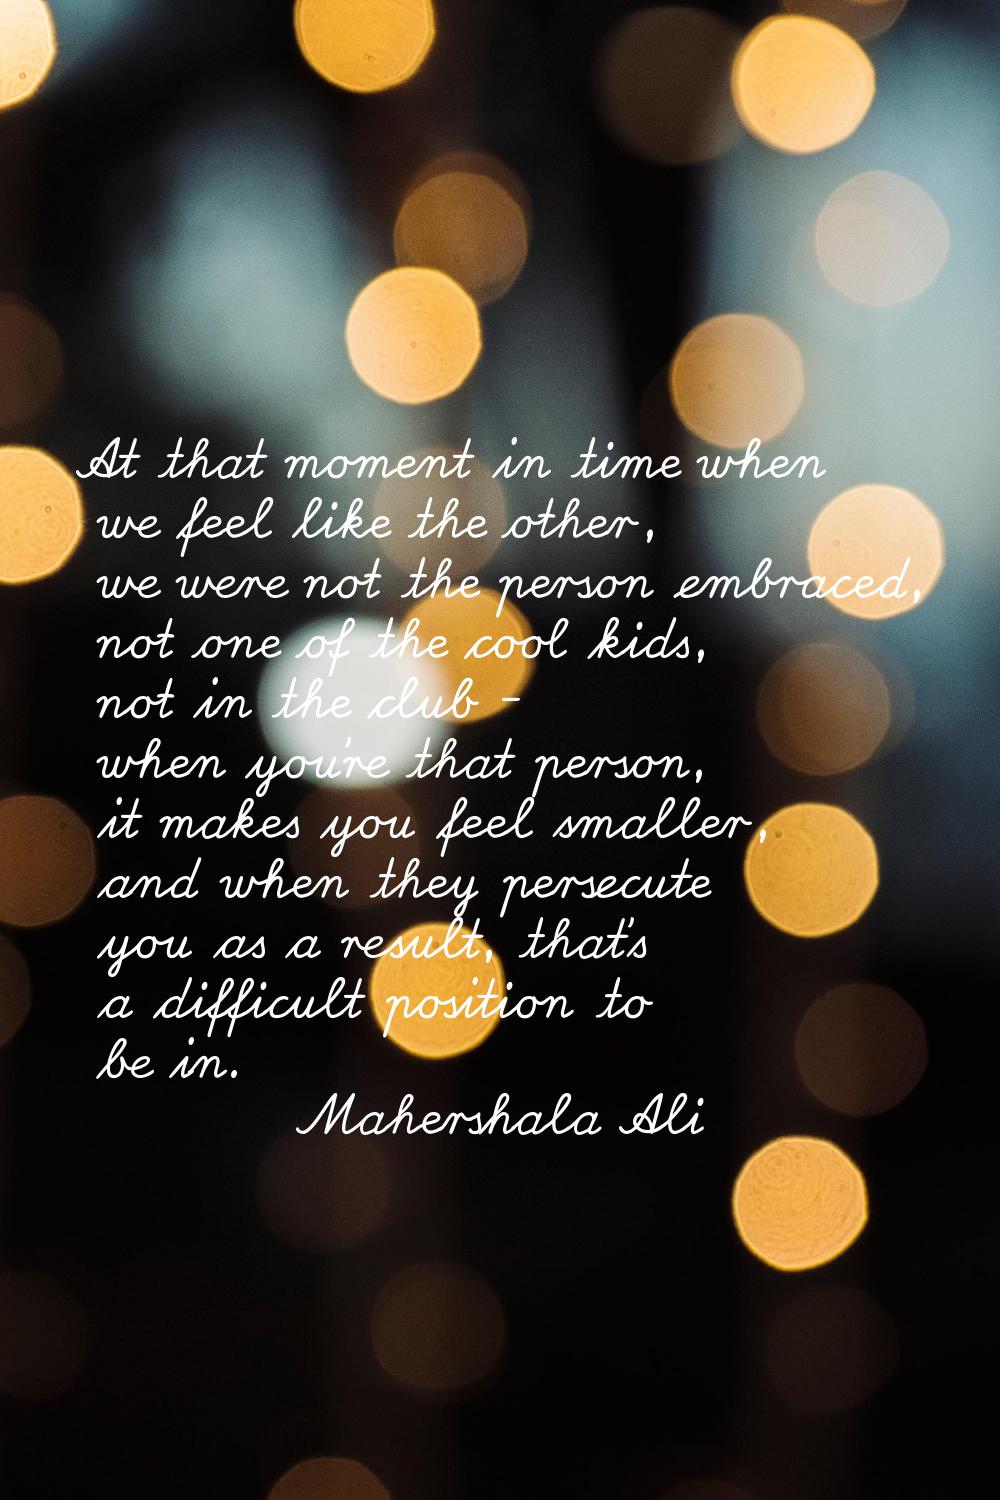 At that moment in time when we feel like the other, we were not the person embraced, not one of the